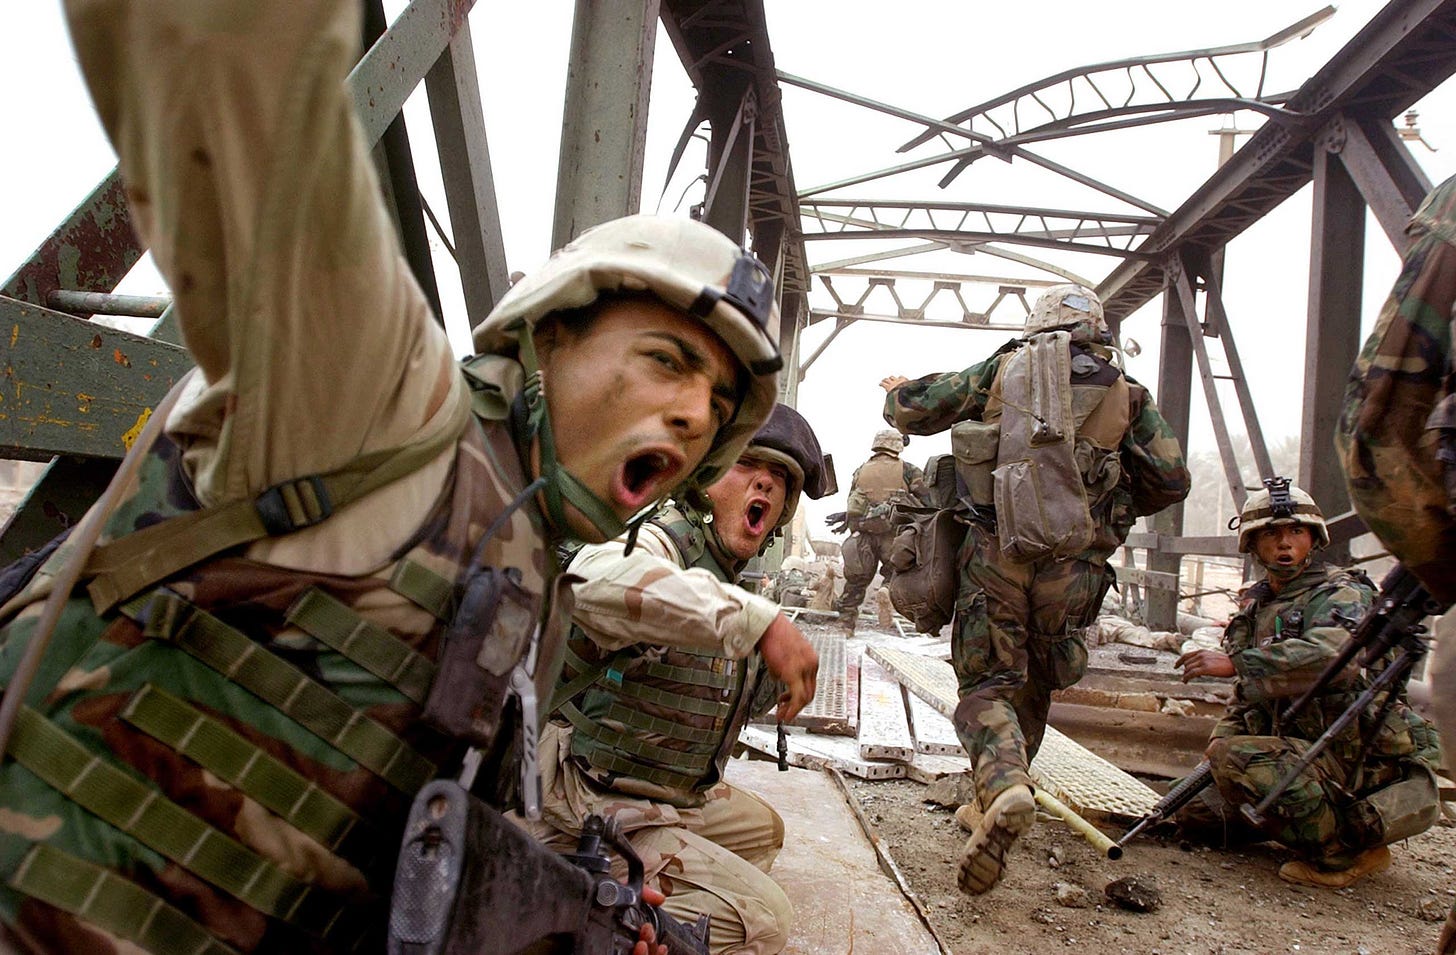 A Decade of War in Iraq: The Images That Moved Them Most | Time